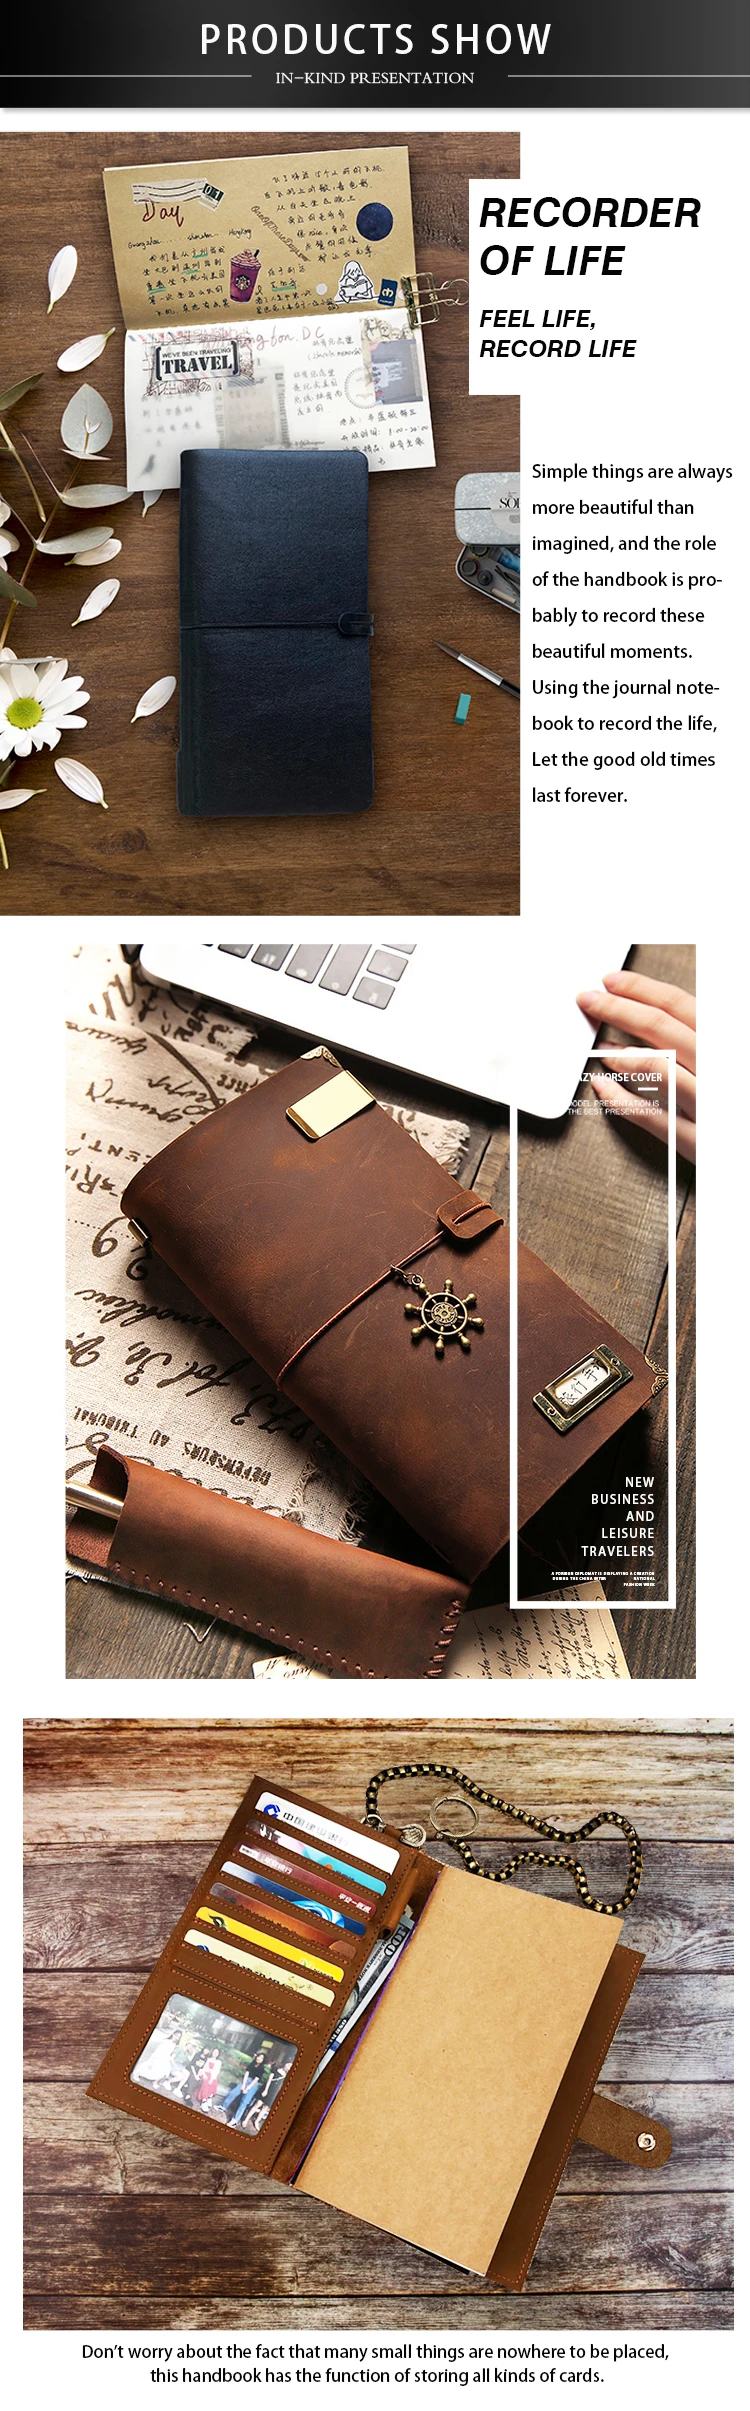 Amazon supplier original design personalised leather linen a5 notebook travel themed journal planner notebook manufacturer